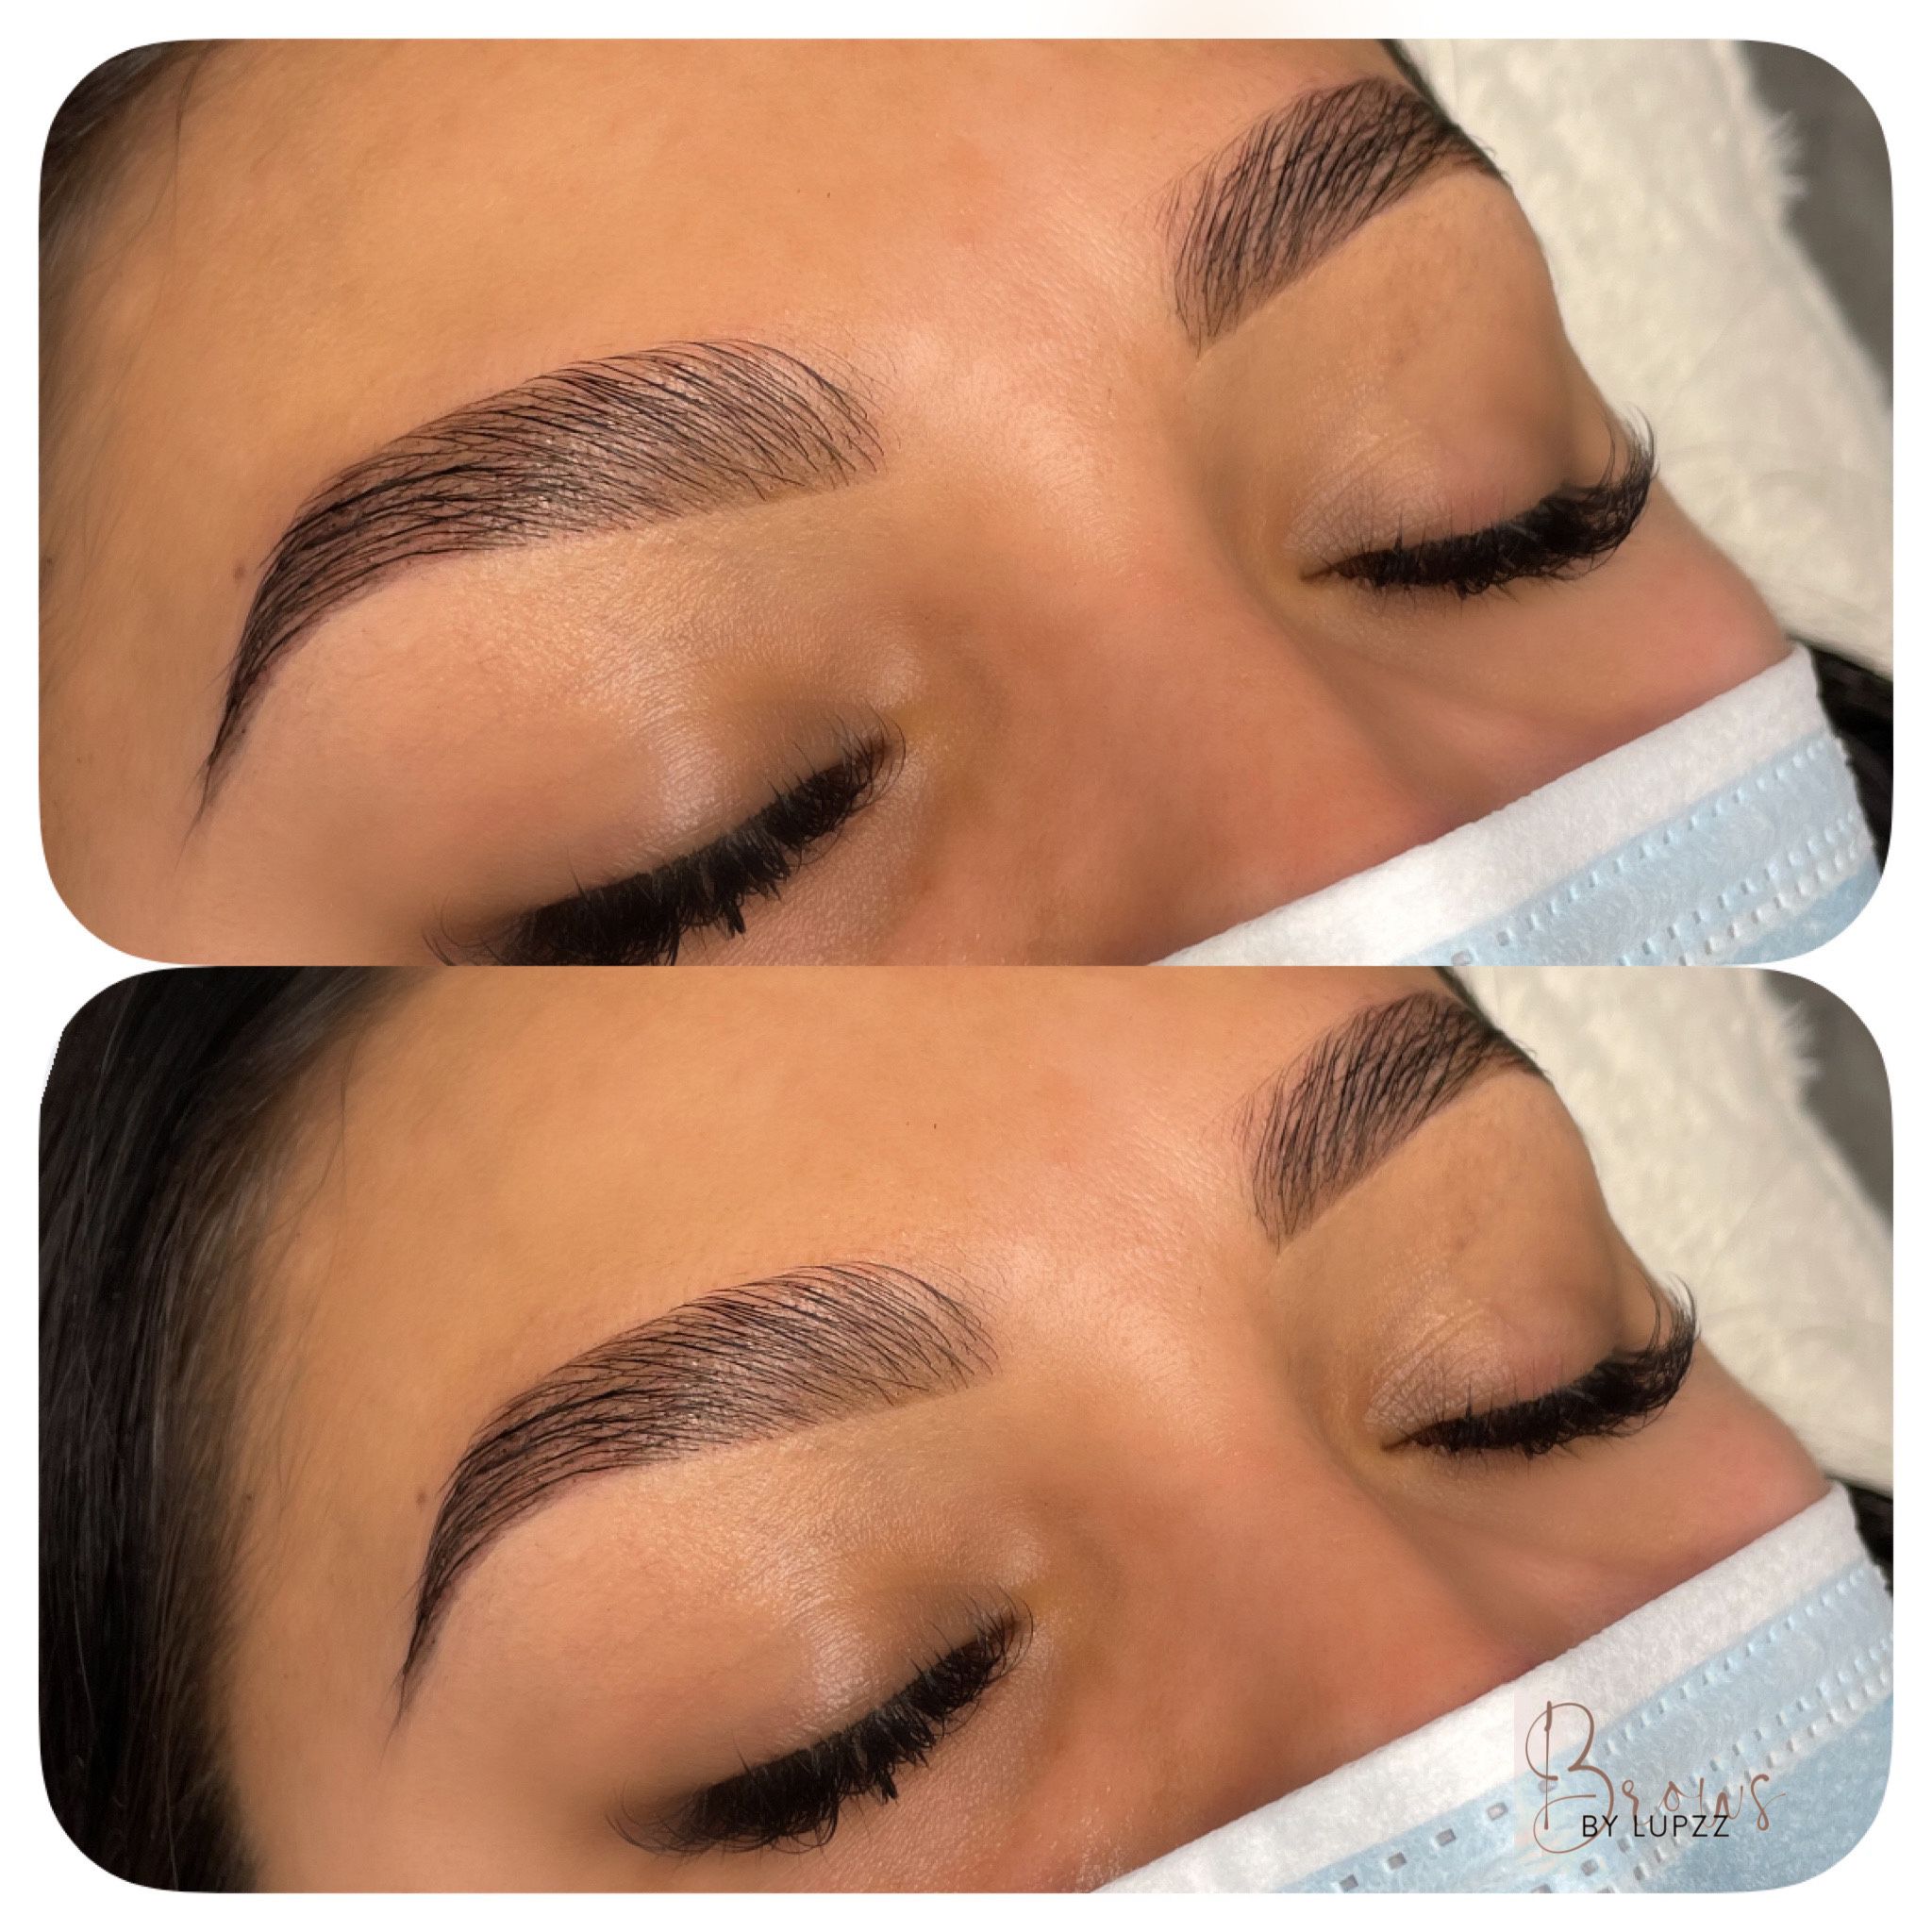 Brow Lamination And Henna Or Tint